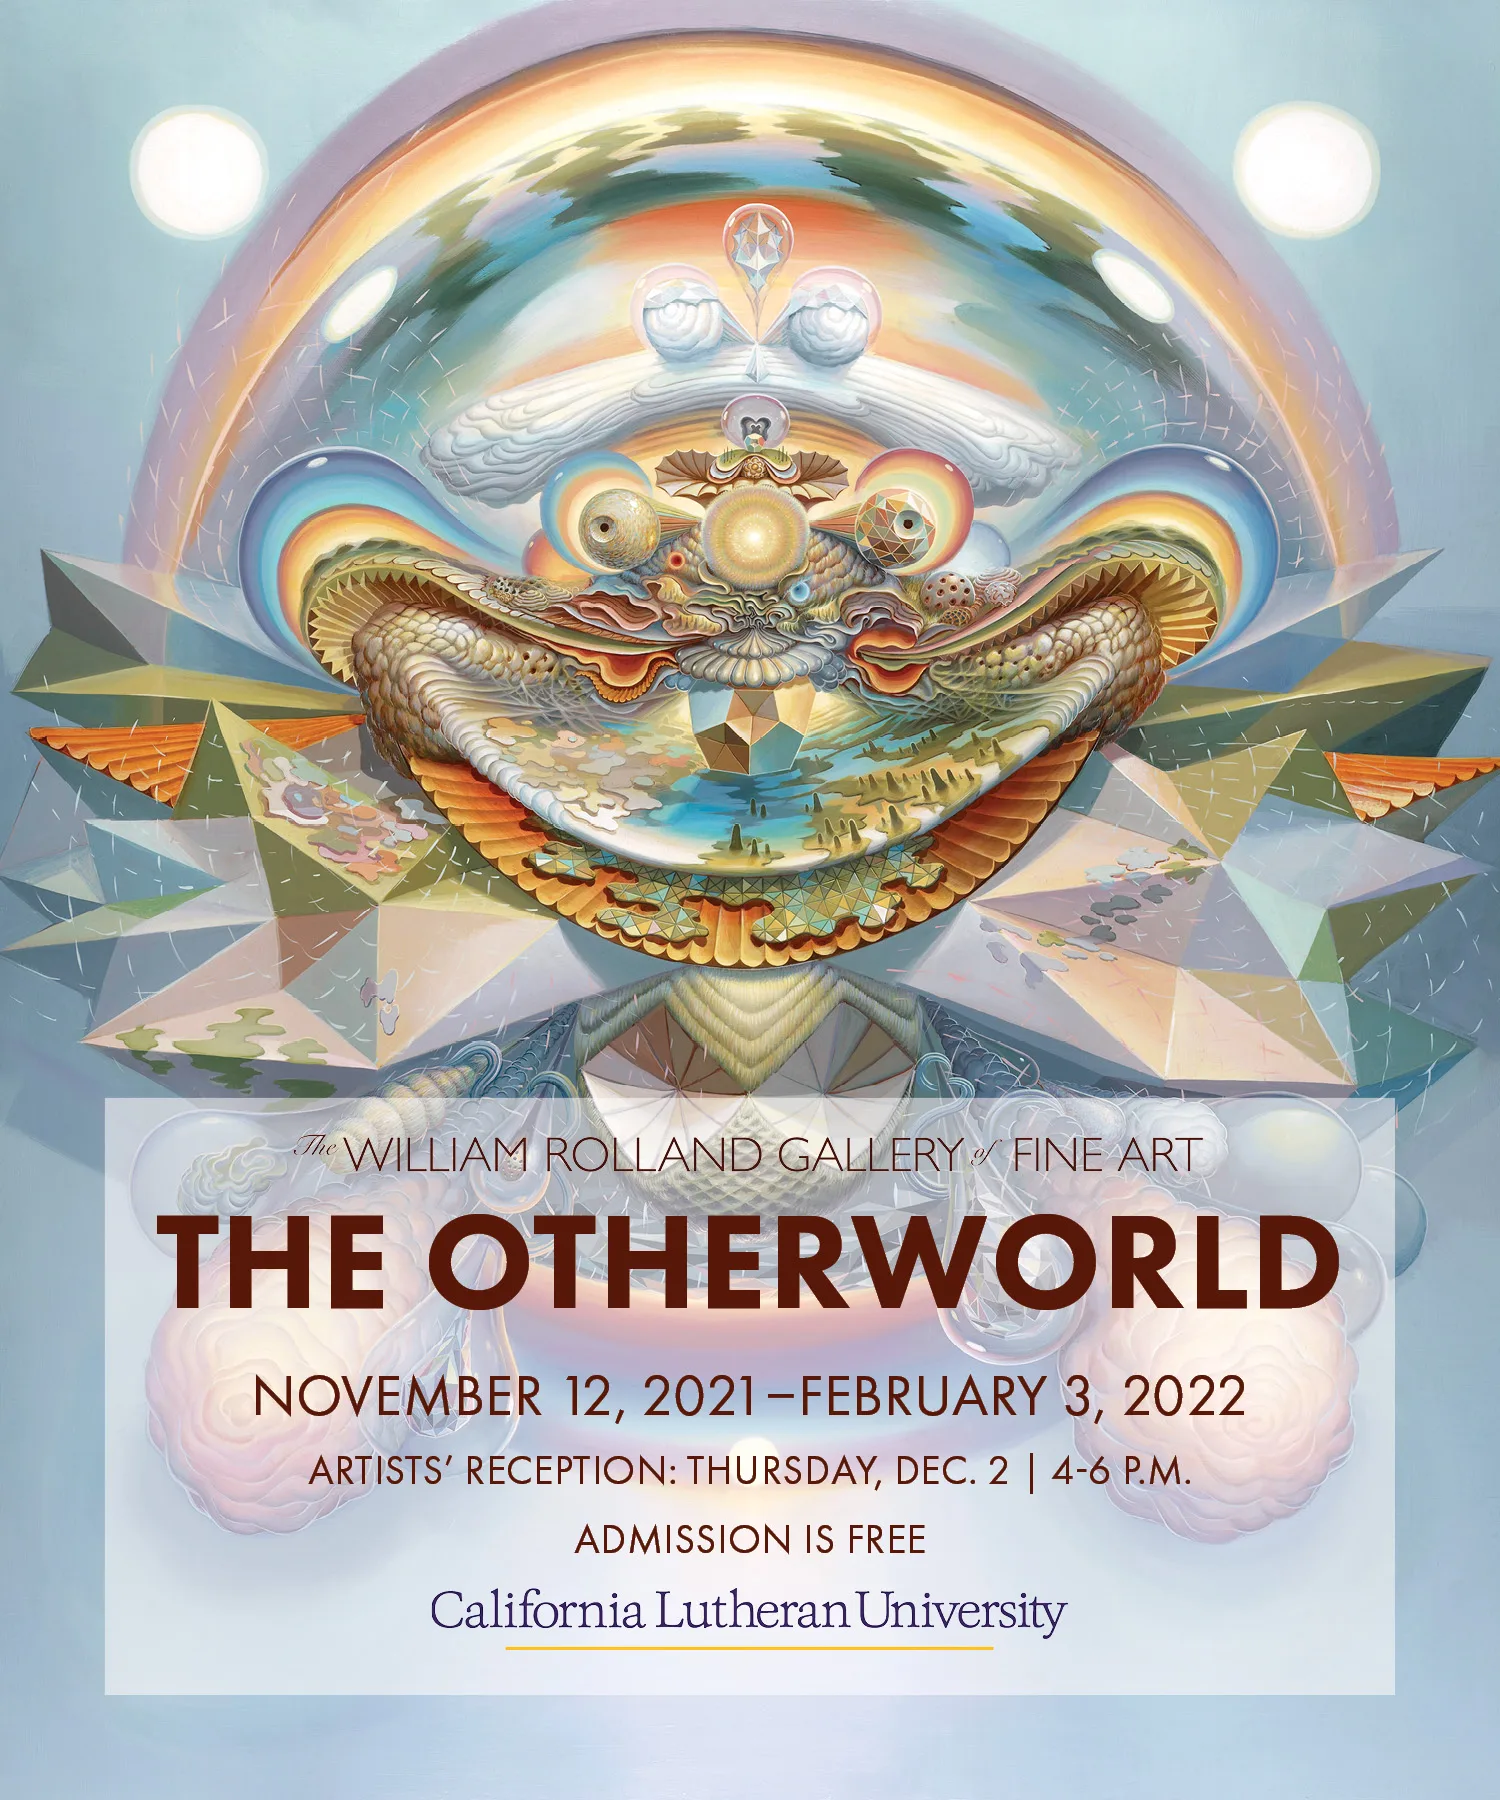 The Otherworld Exhibition: Kwan Fong Gallery, and the Rolland Gallery